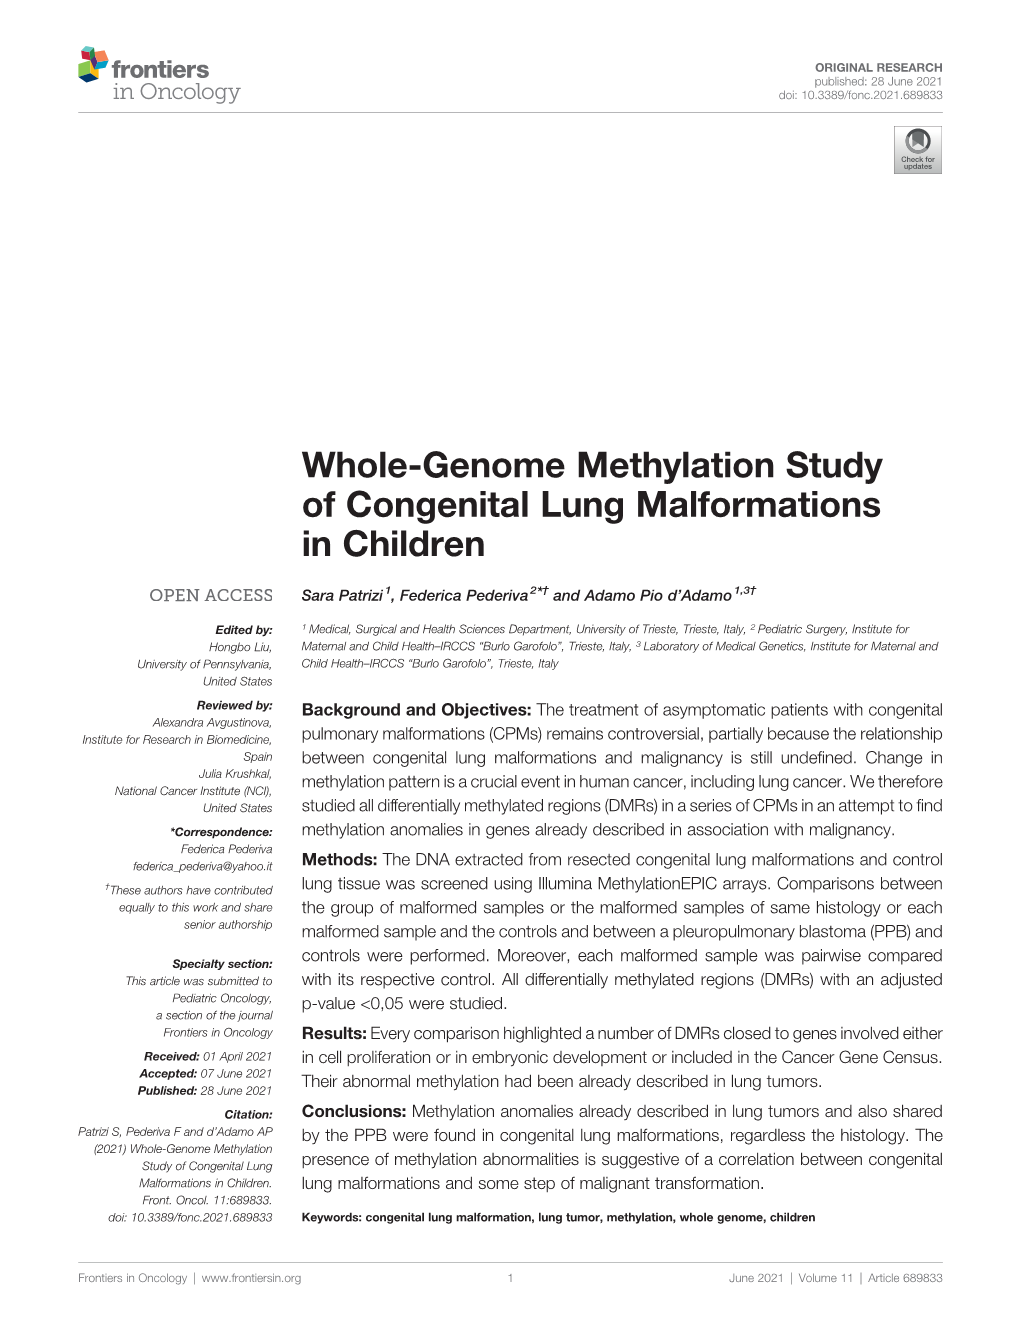 Whole-Genome Methylation Study of Congenital Lung Malformations in Children